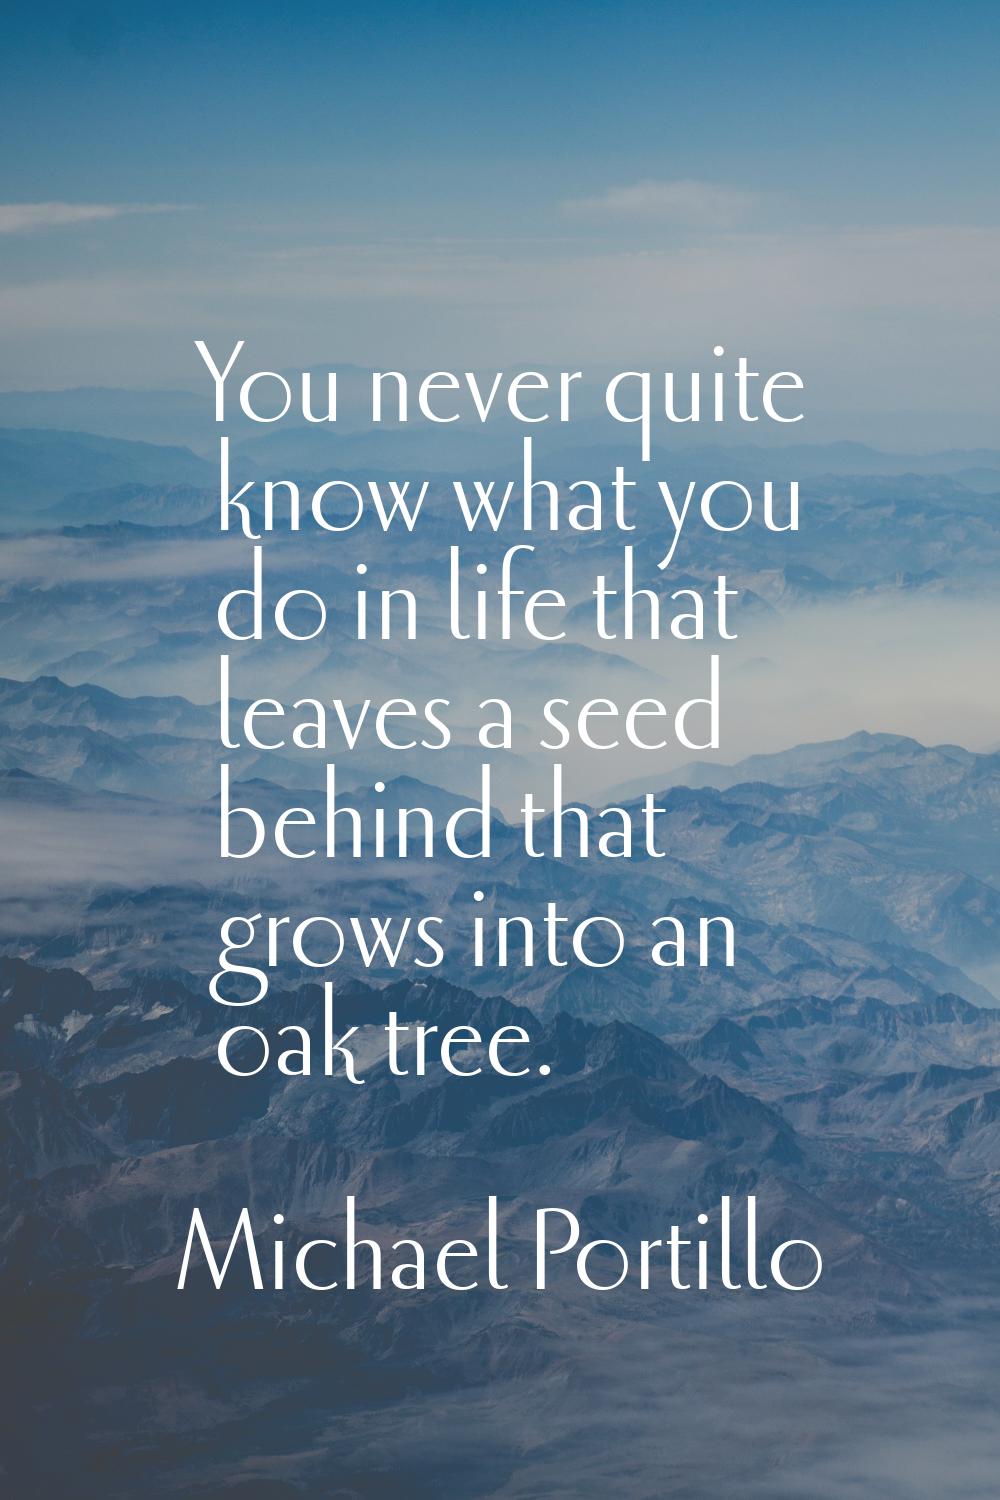 You never quite know what you do in life that leaves a seed behind that grows into an oak tree.